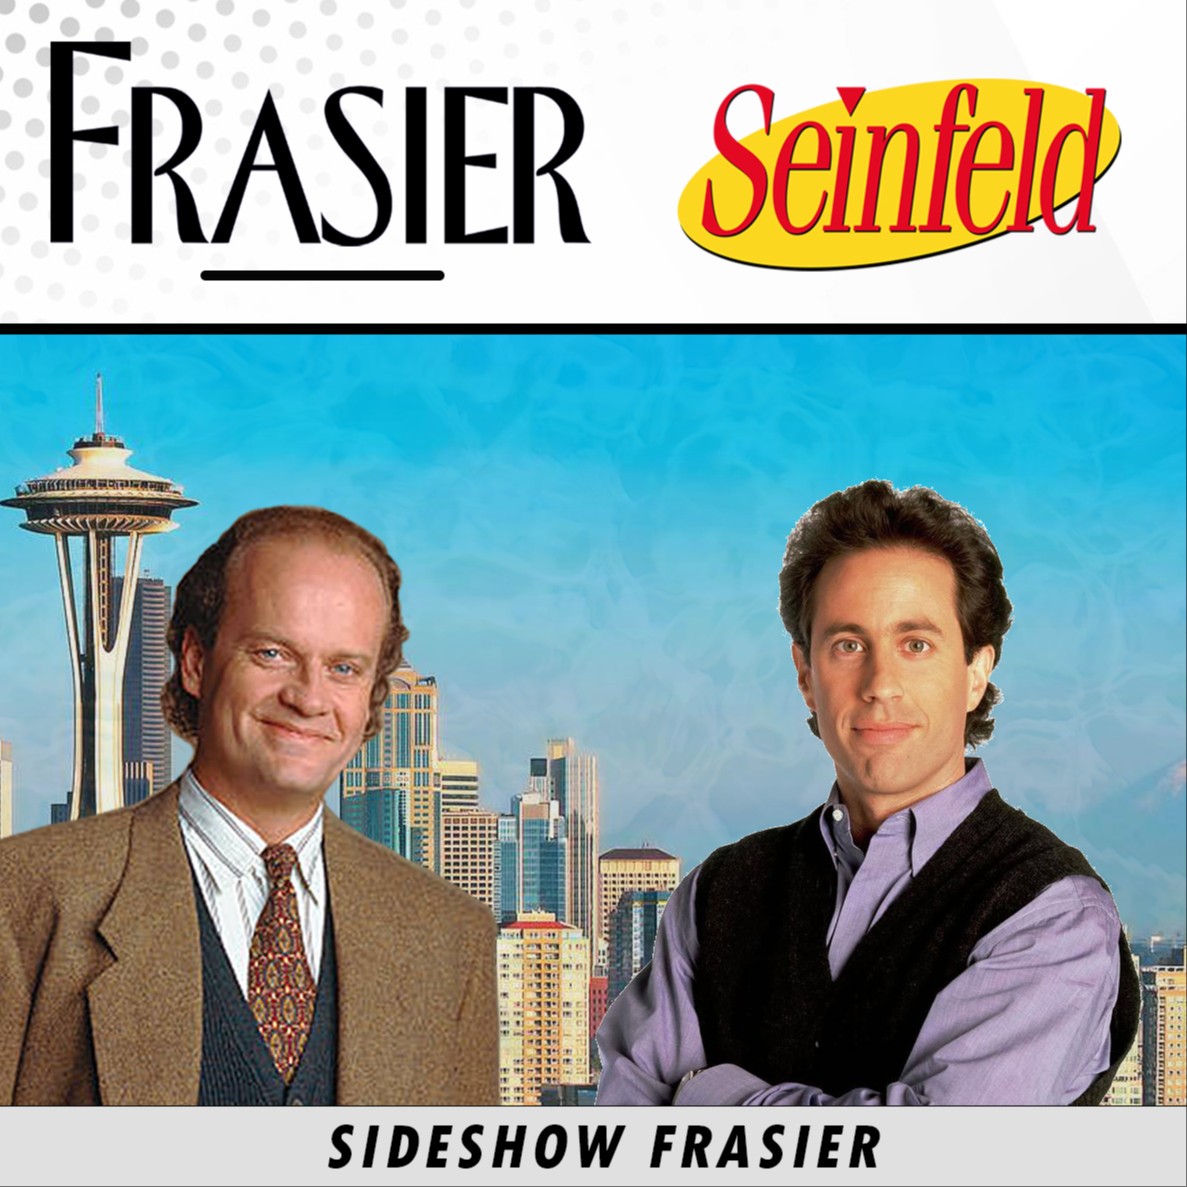 Frasier - My Coffee with Niles | Seinfeld - The Opposite